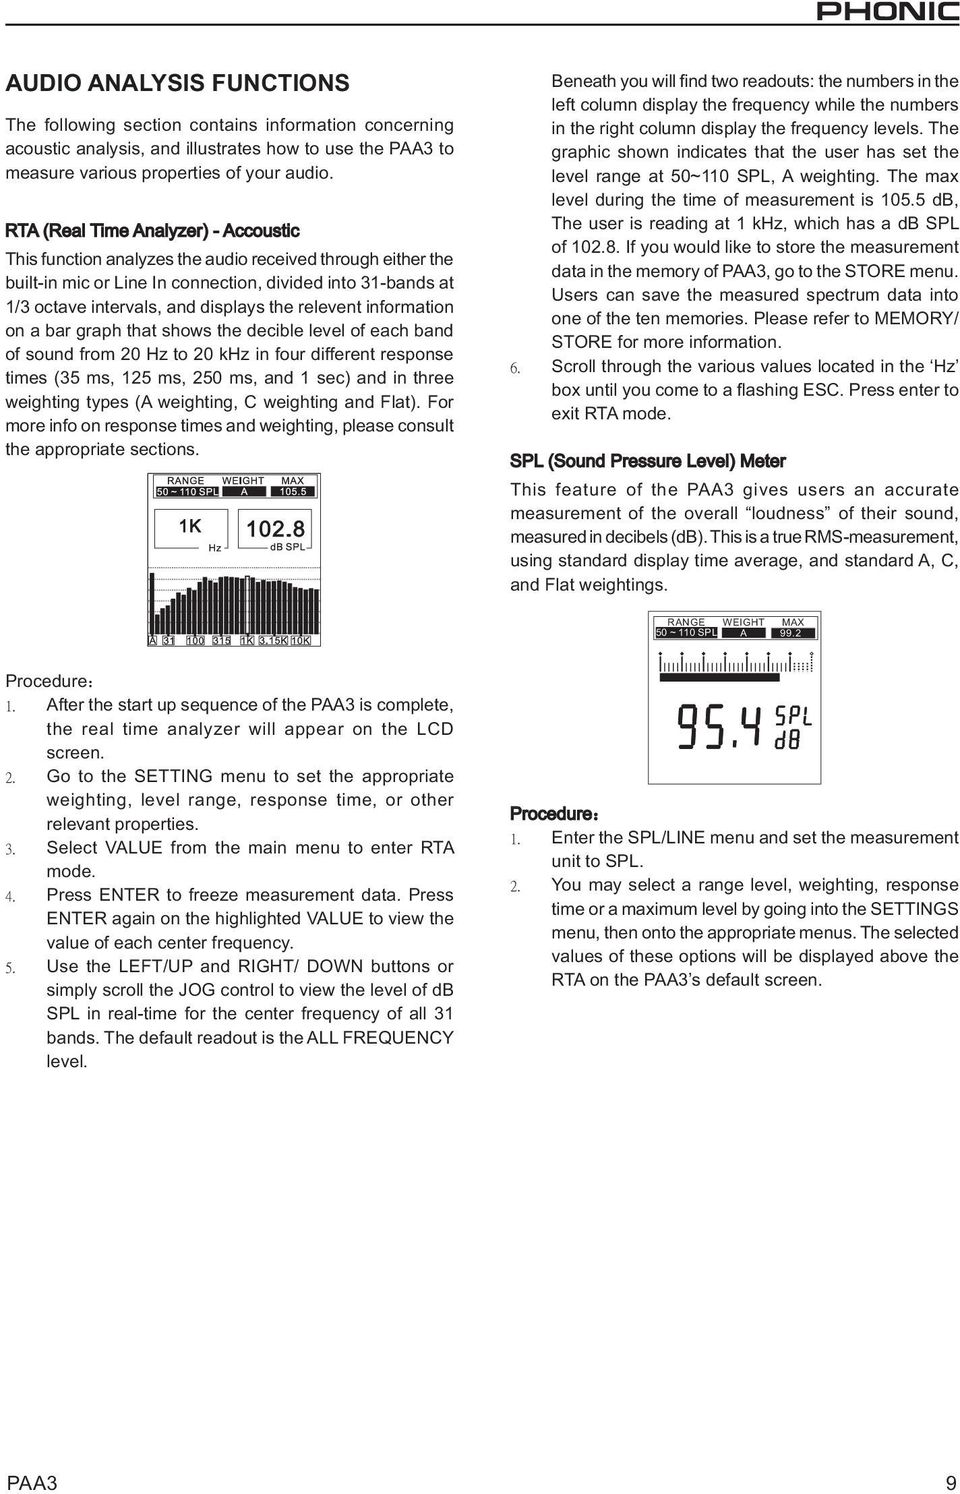 relevent information on a bar graph that shows the decible level of each band of sound from 20 Hz to 20 khz in four different response times (35 ms, 125 ms, 250 ms, and 1 sec) and in three weighting